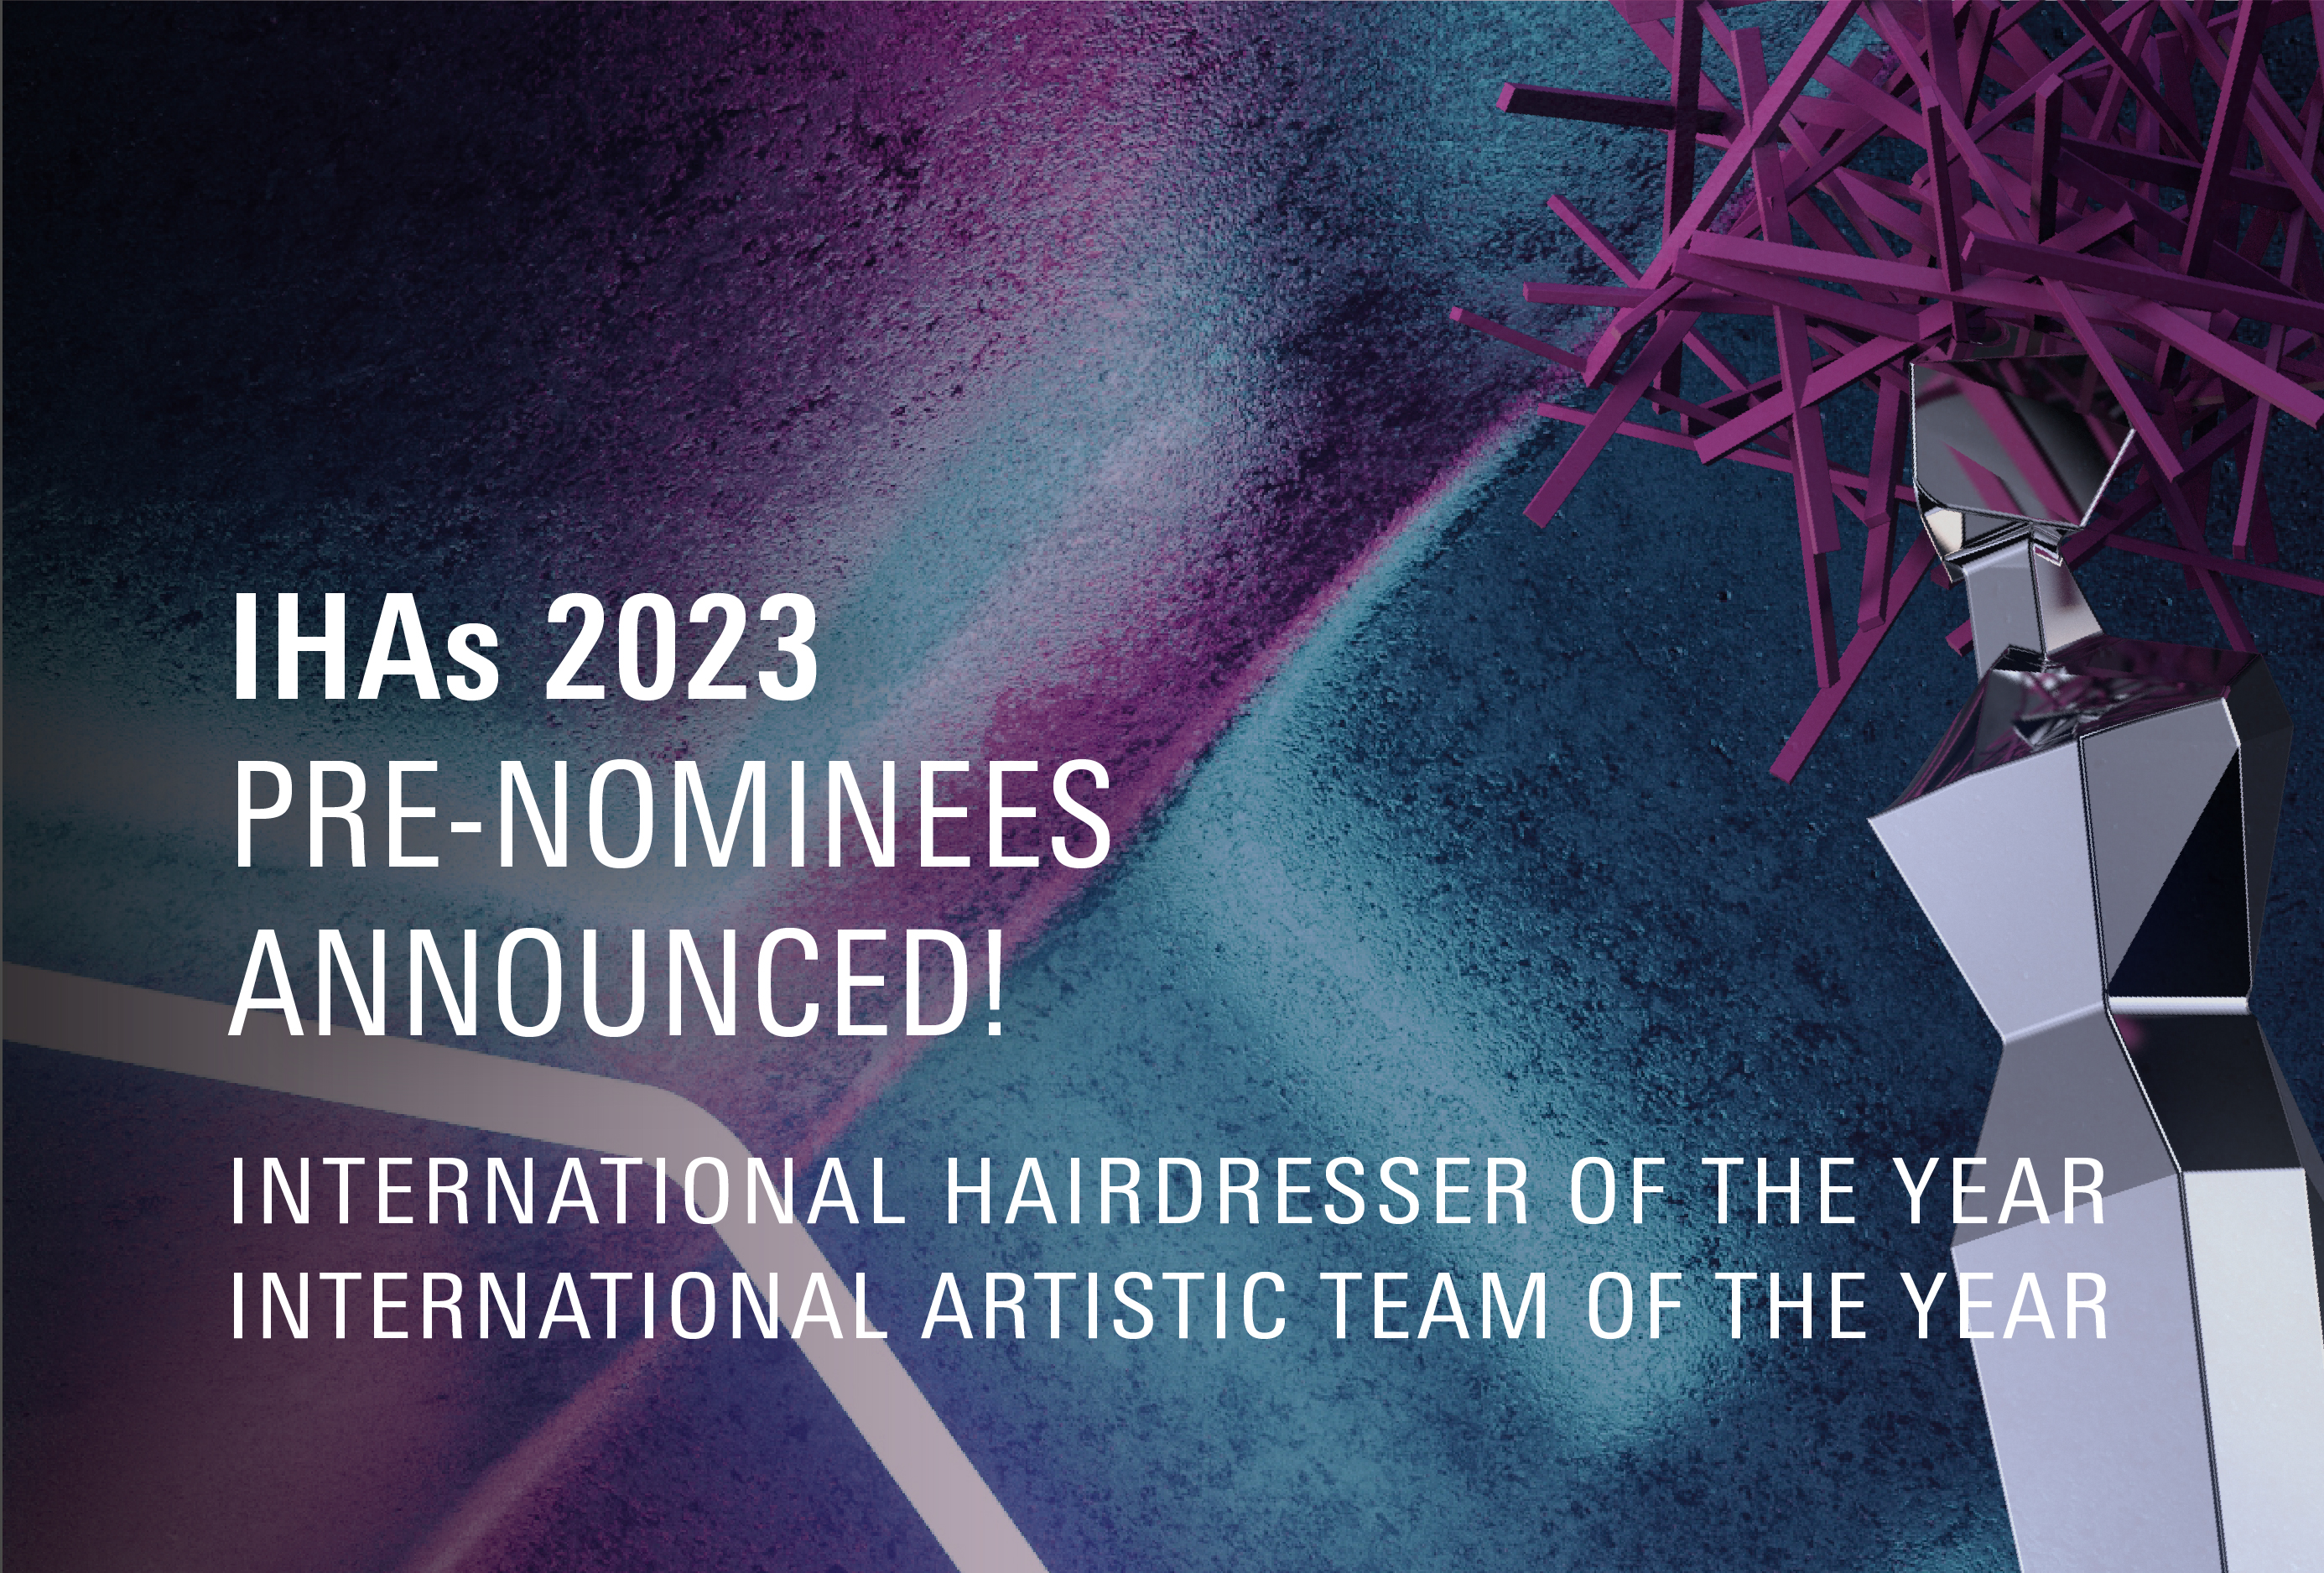 Pre-nominees for International Hairdresser of the Year and International Artistic Team of the Year